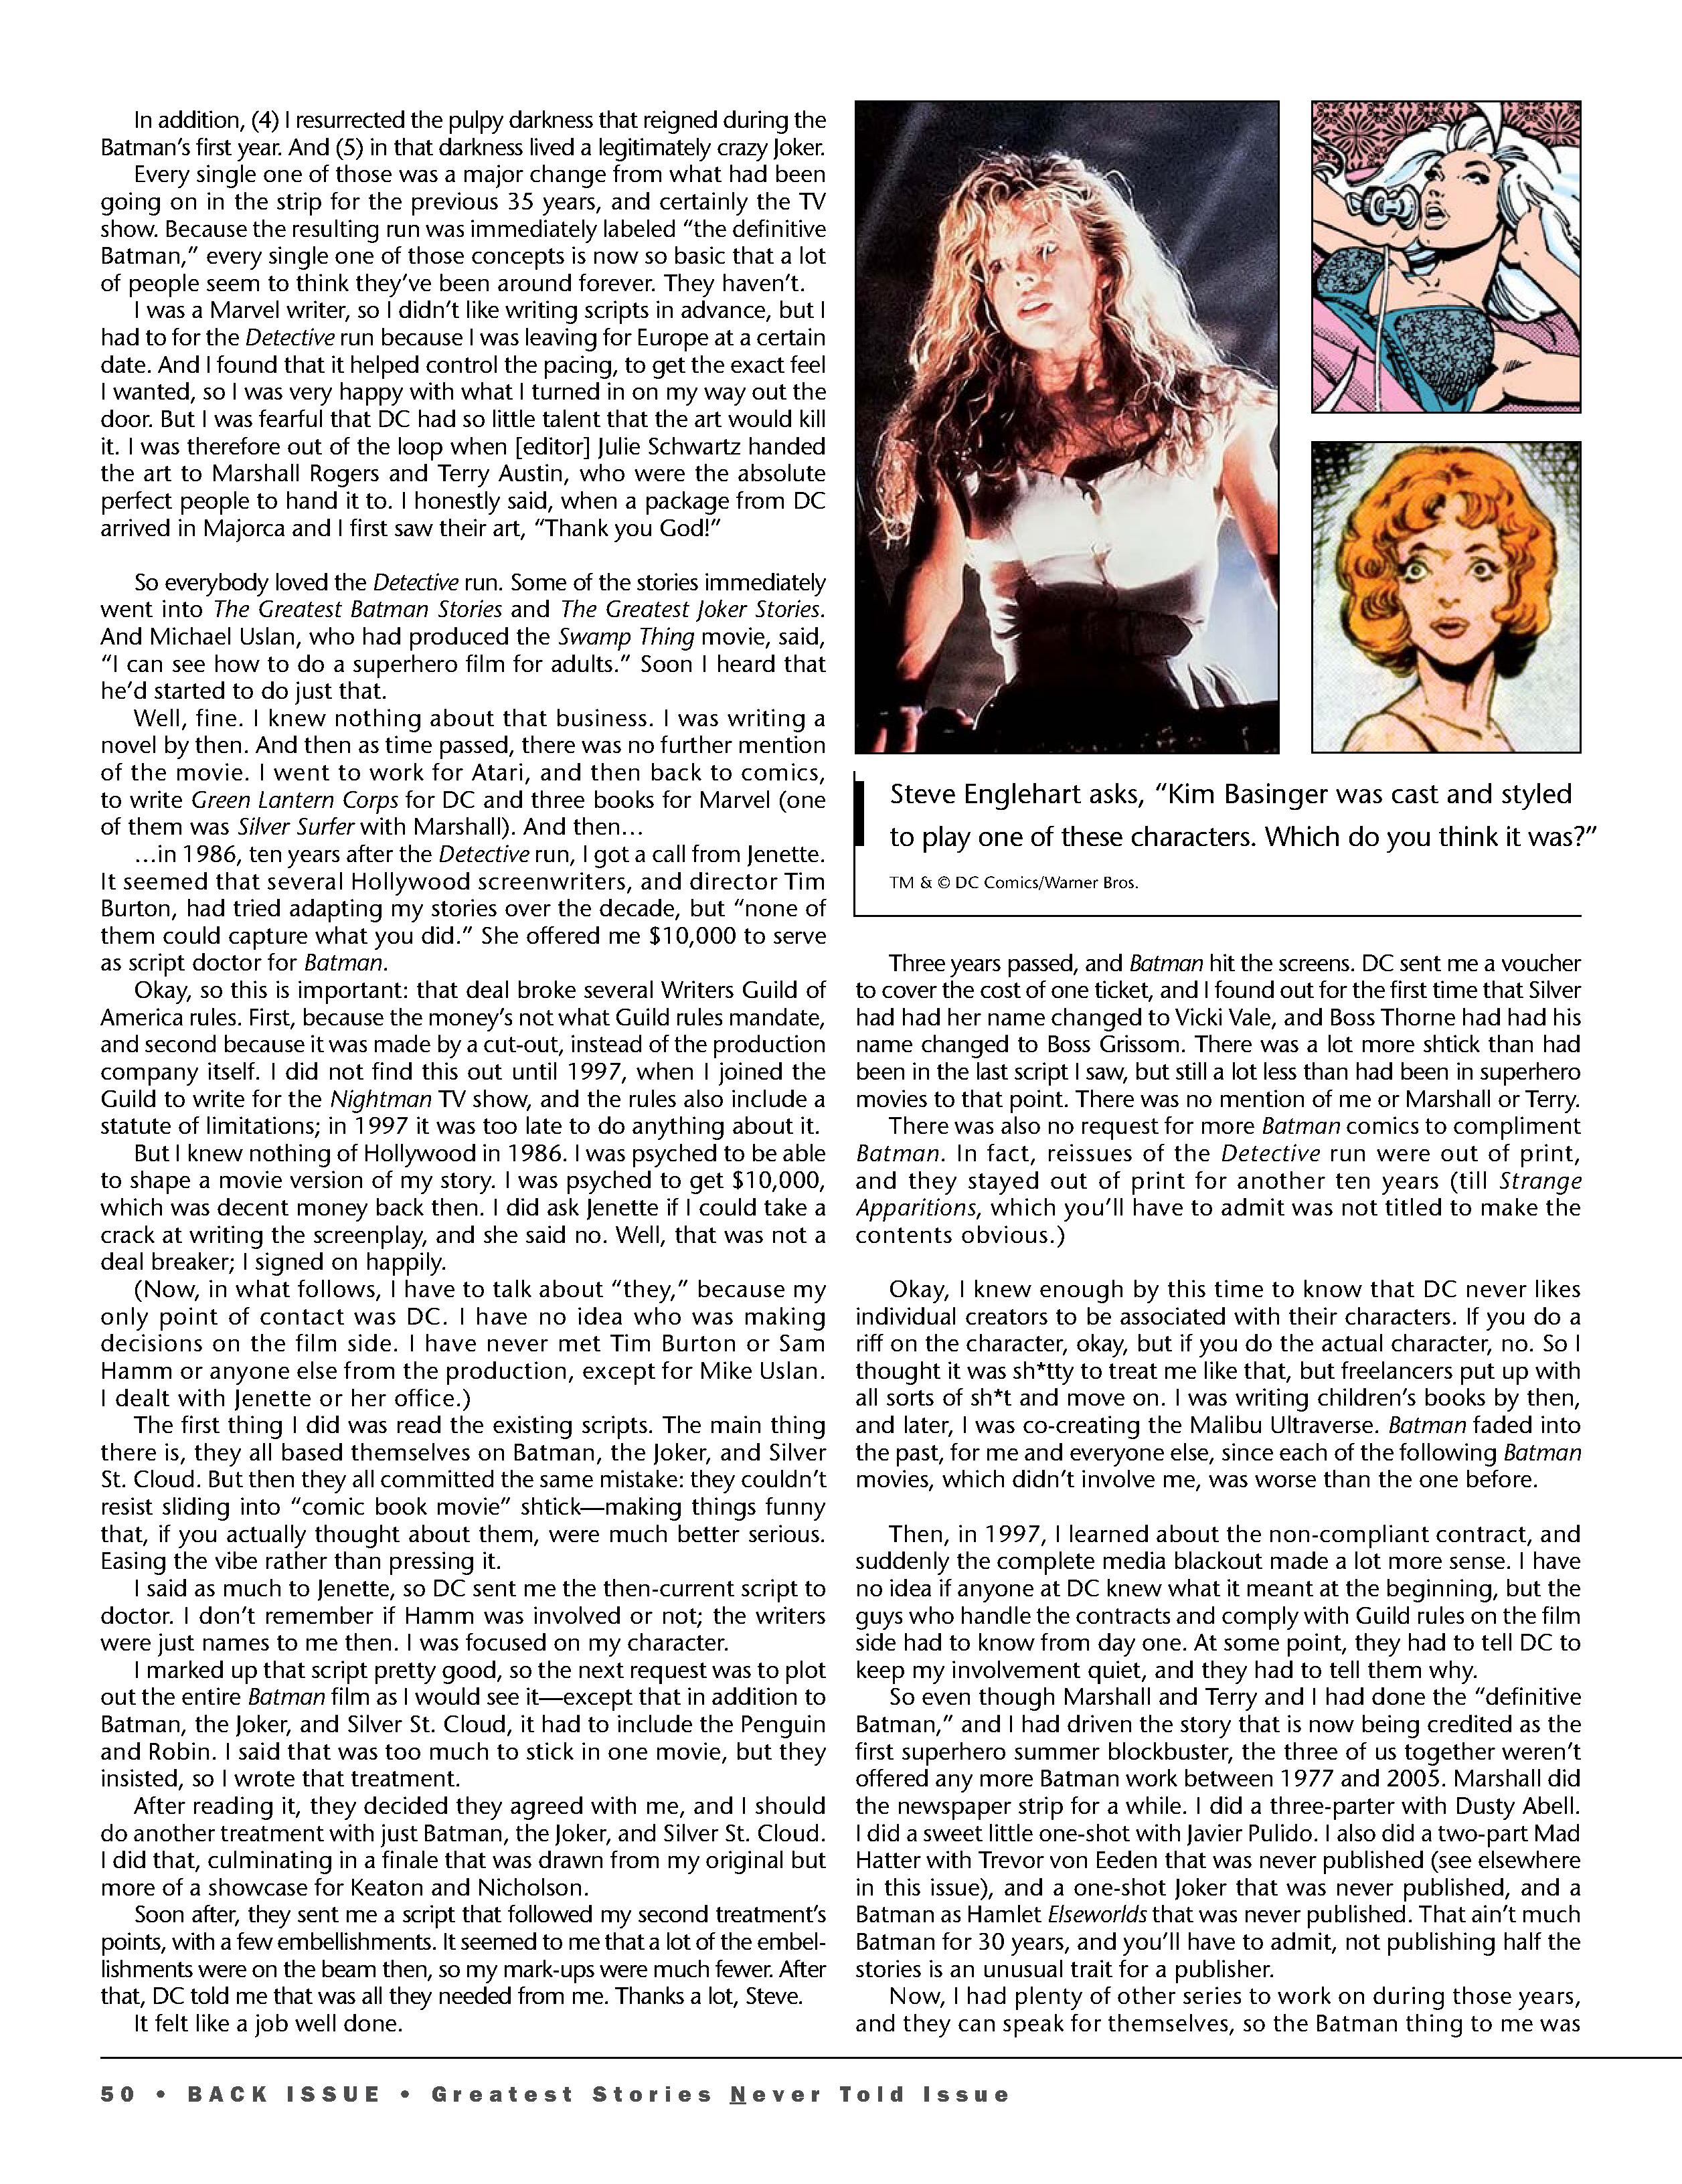 Read online Back Issue comic -  Issue #118 - 52